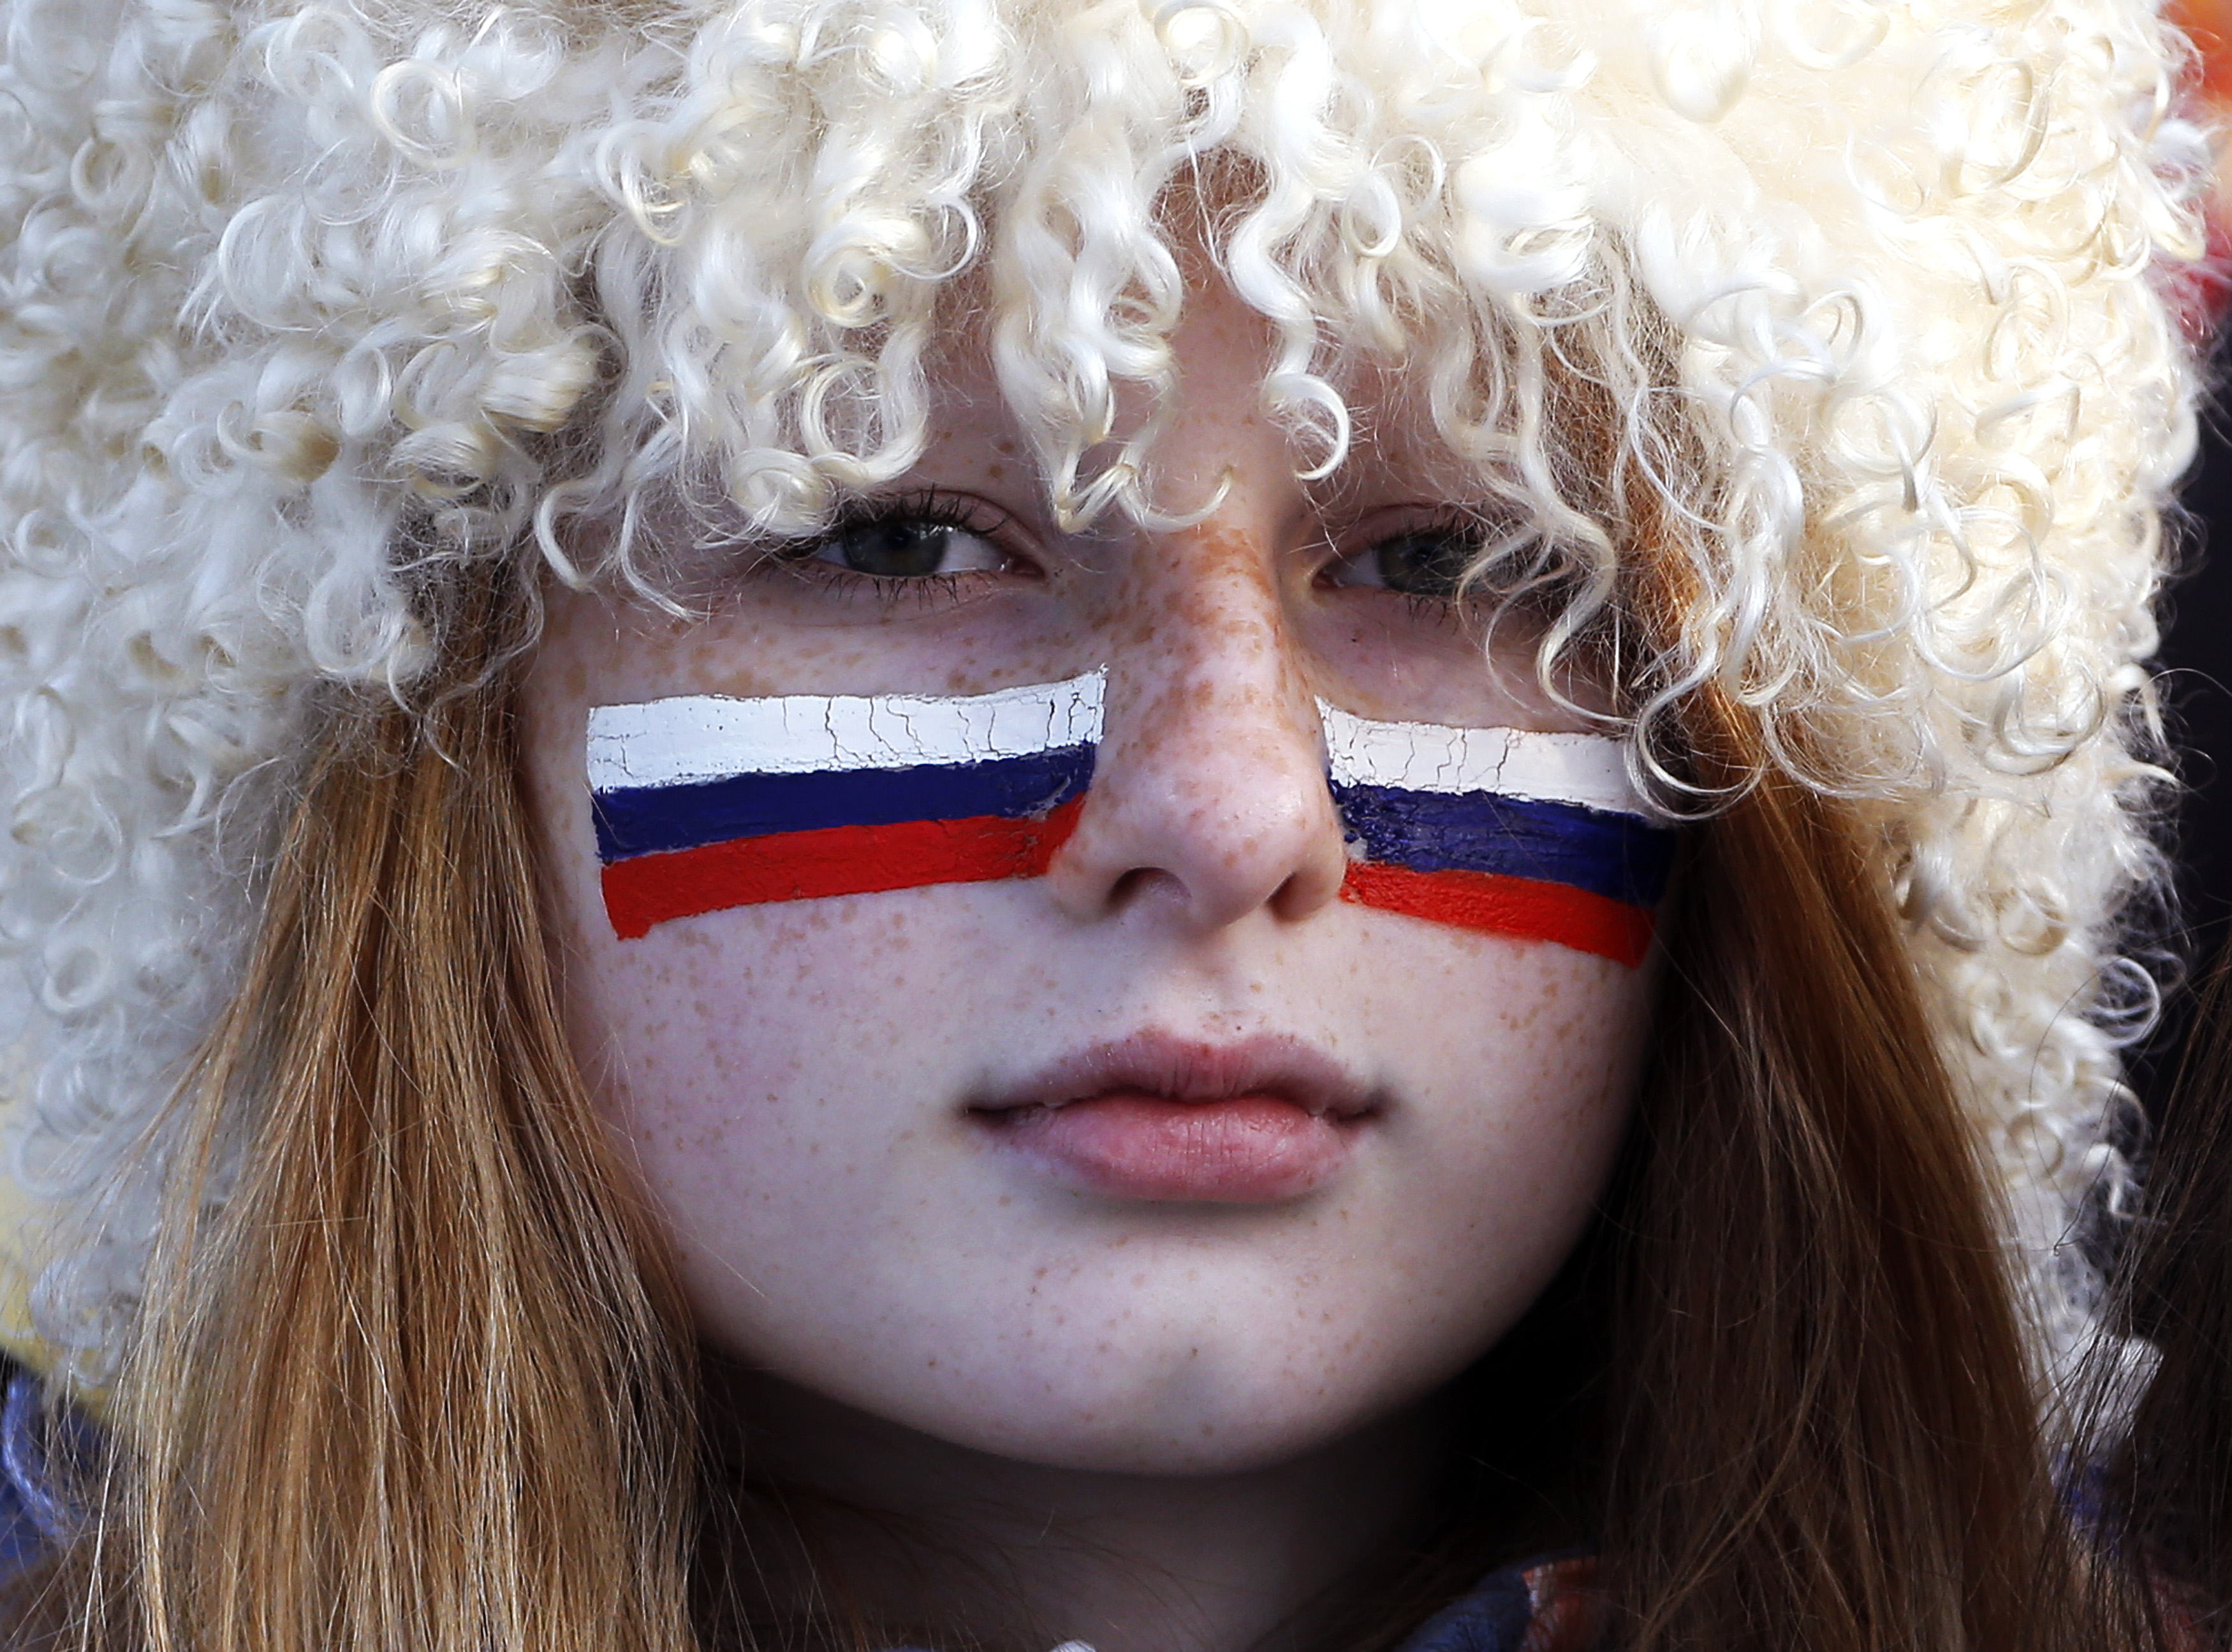 A Russian fan with her face painted with the Russian flag watches the men's quarter-finals ice hockey game between Russia and Finland. Russia was eliminated from the men's ice hockey competition at the Sochi Games on Wednesday following a 3-1 quarter-final loss to Finland.